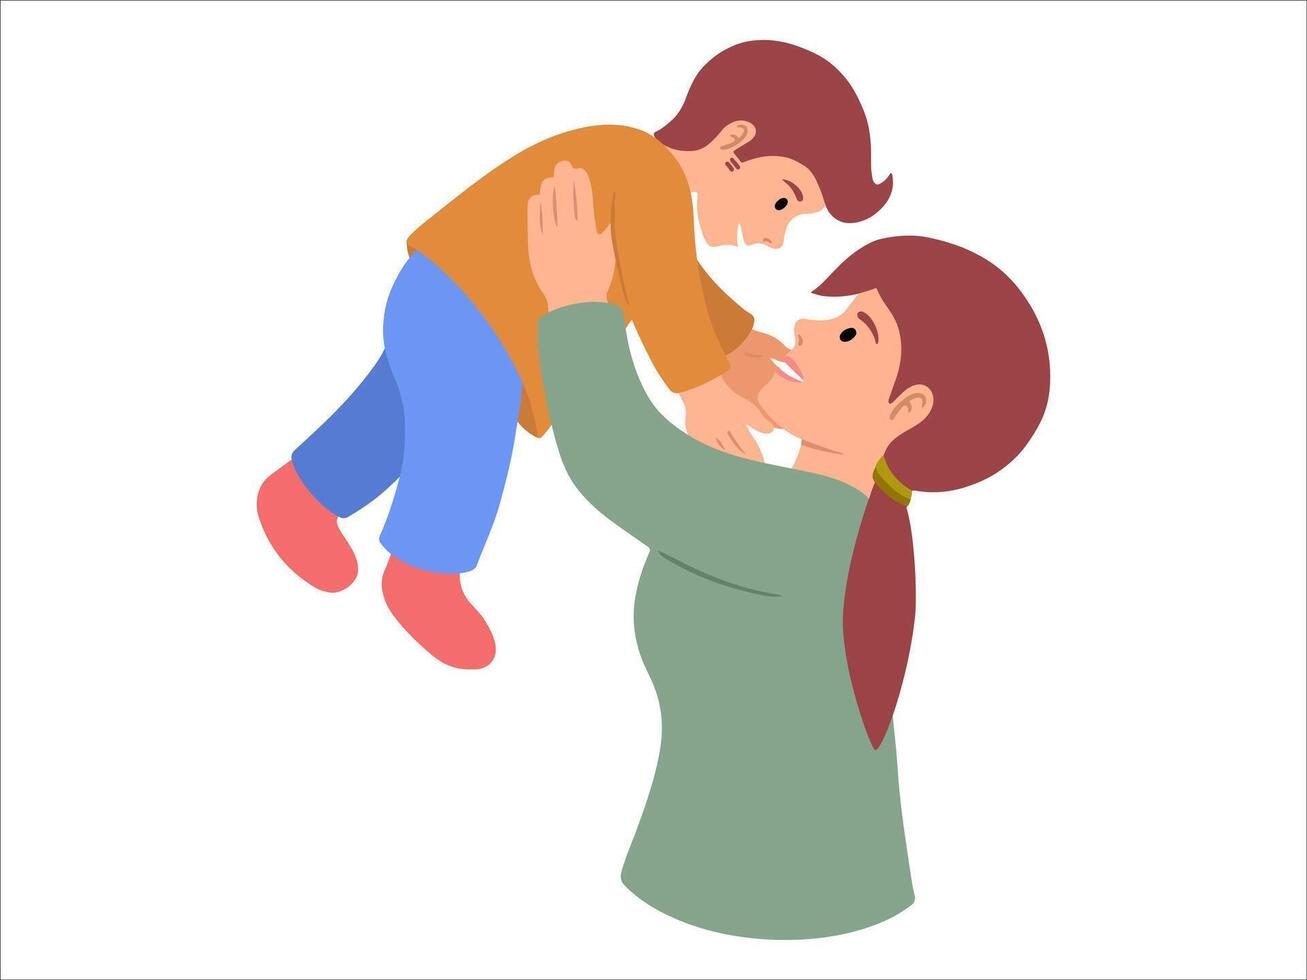 Mother holding kid or avatar icon illustration vector